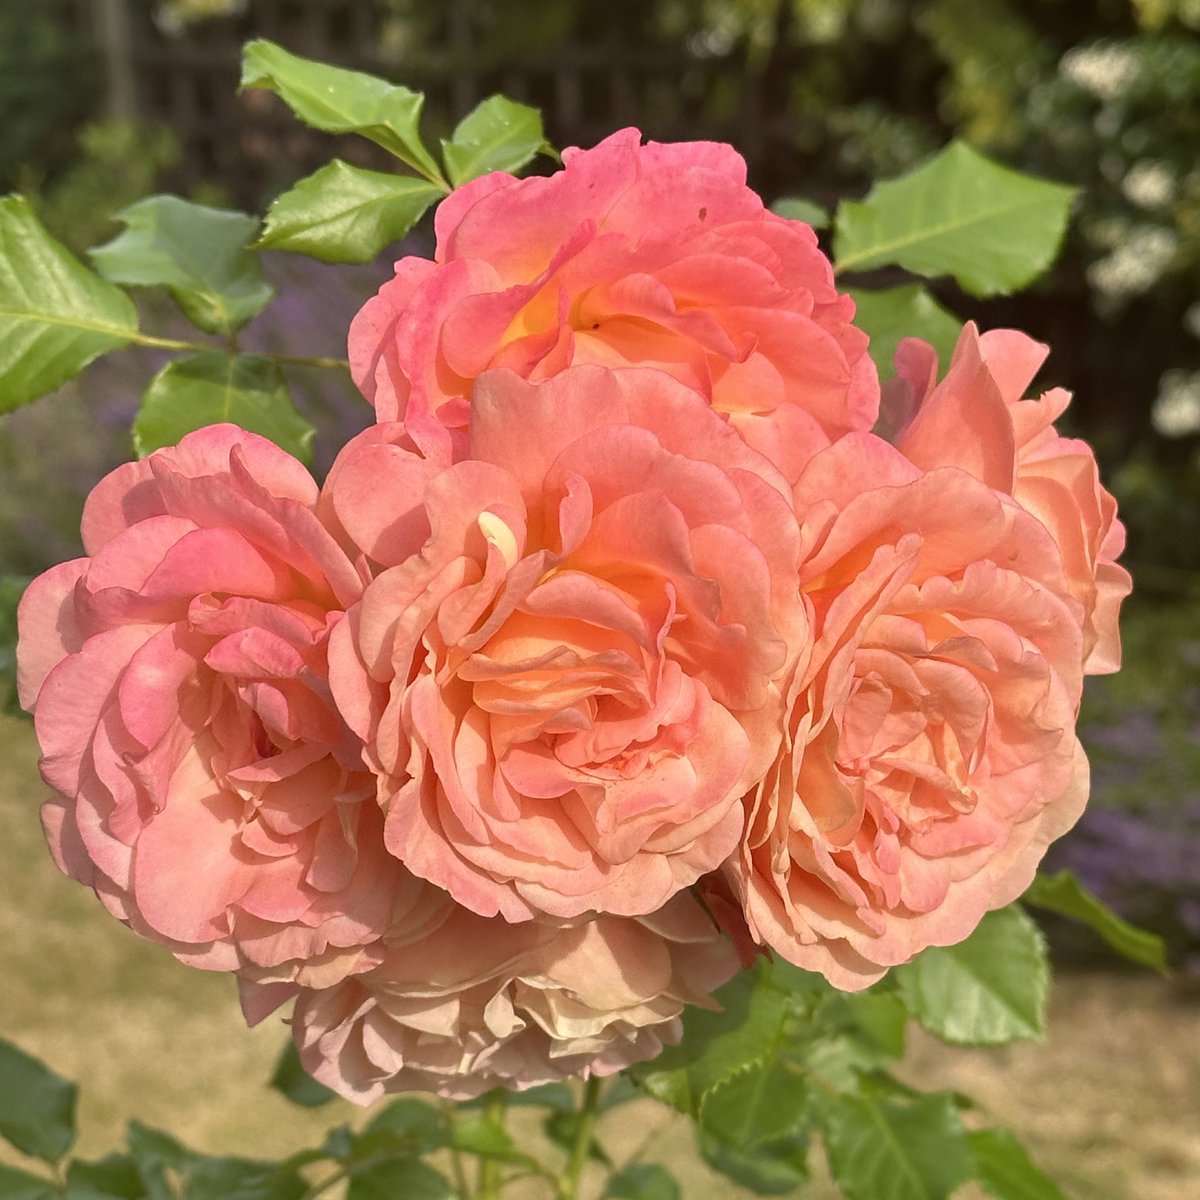 ‘Peach Melba’. Scented, floriferous and healthy climbing rose. 
A worthy winner of the 2023 Rose of the Year Award.
Have a good day everyone, take care and stay safe.
#roseoftheyear #RoseADay #Advent #roses
@loujnicholls @kgimson